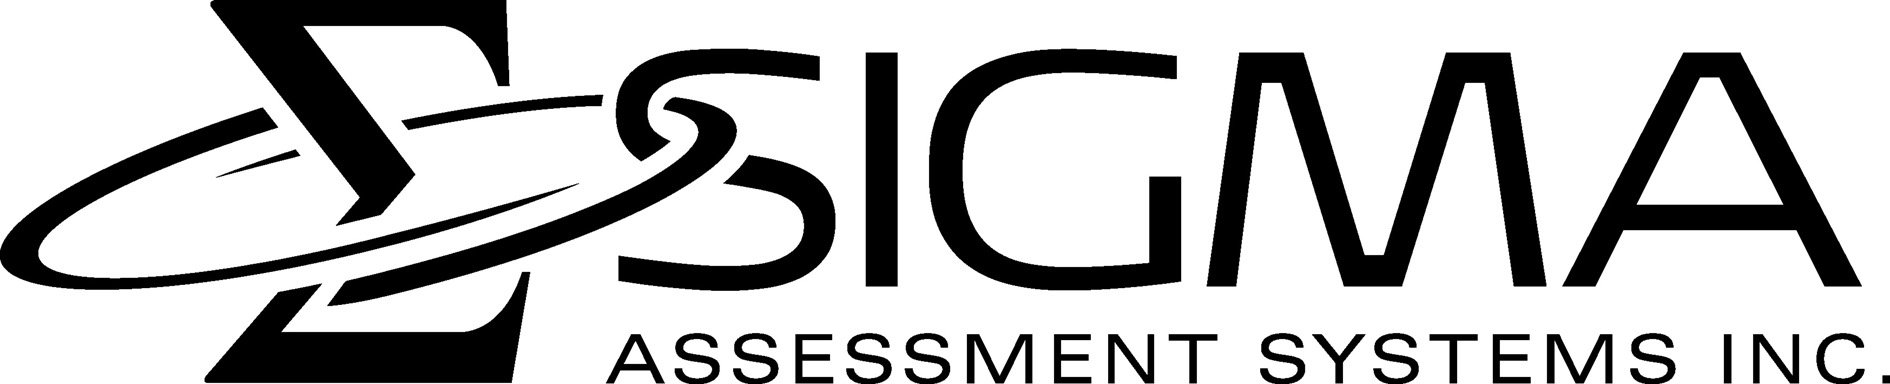  SIGMA ASSESSMENT SYSTEMS INC.